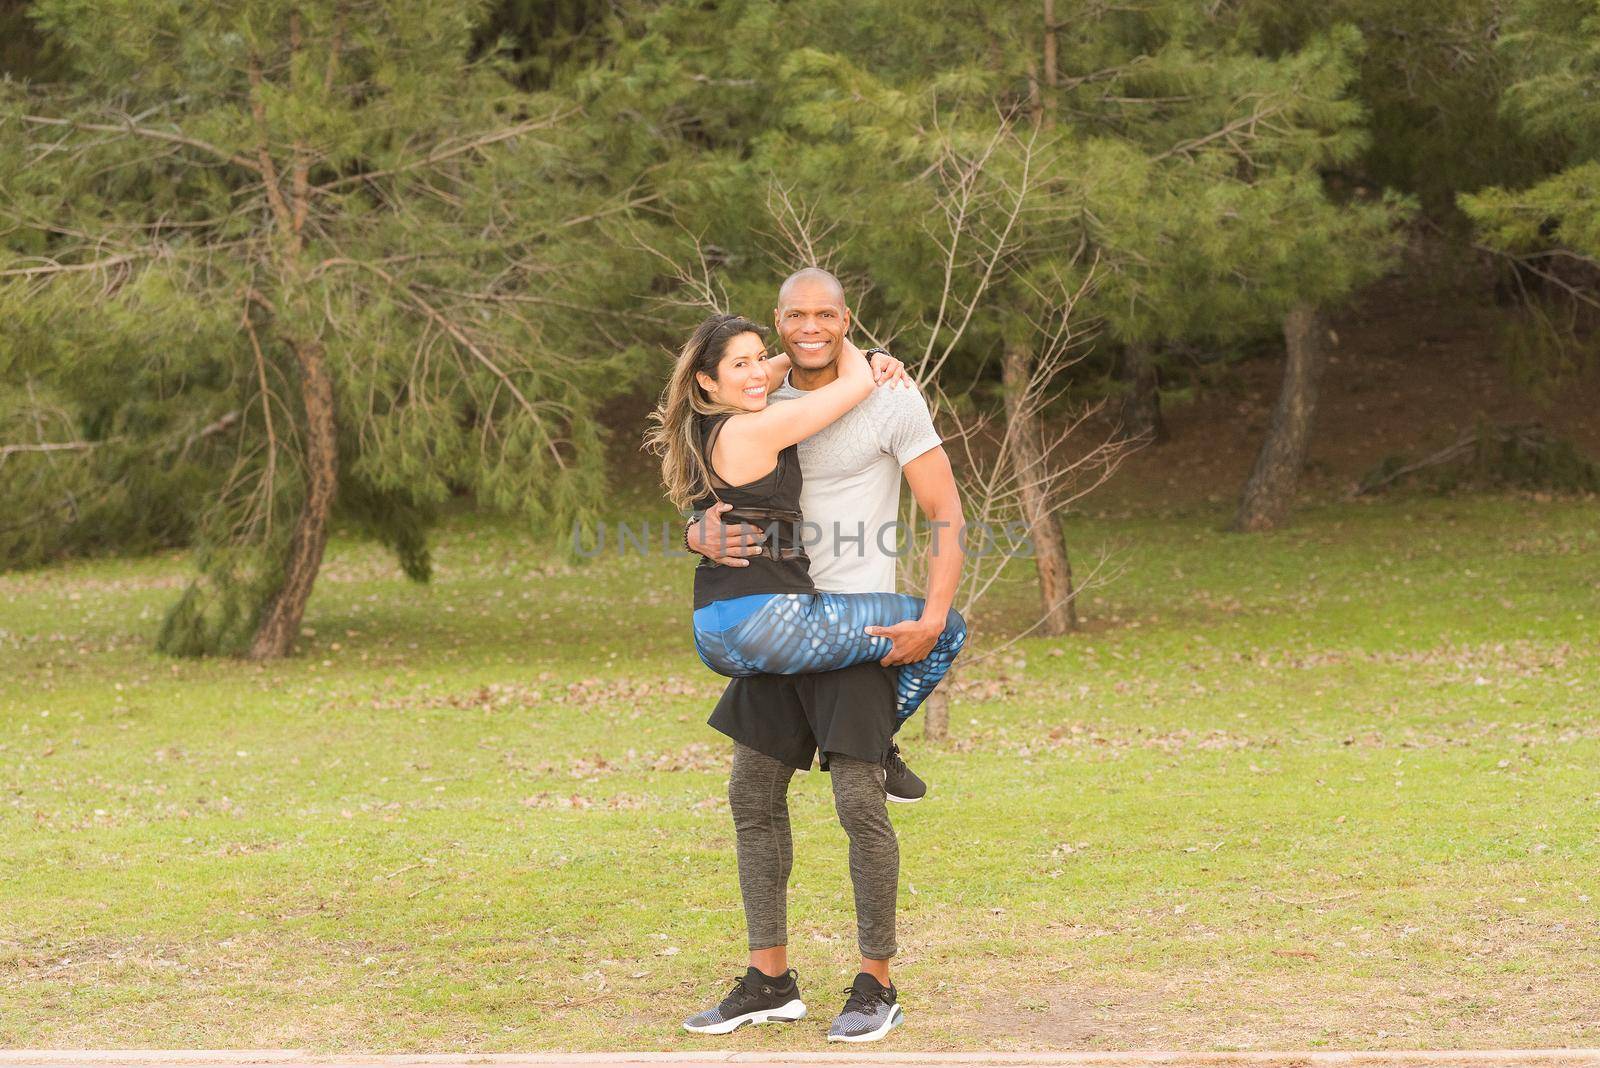 Fitness couple hugging looking at the camera in the park. Multi-ethnic couple exercising outdoors.